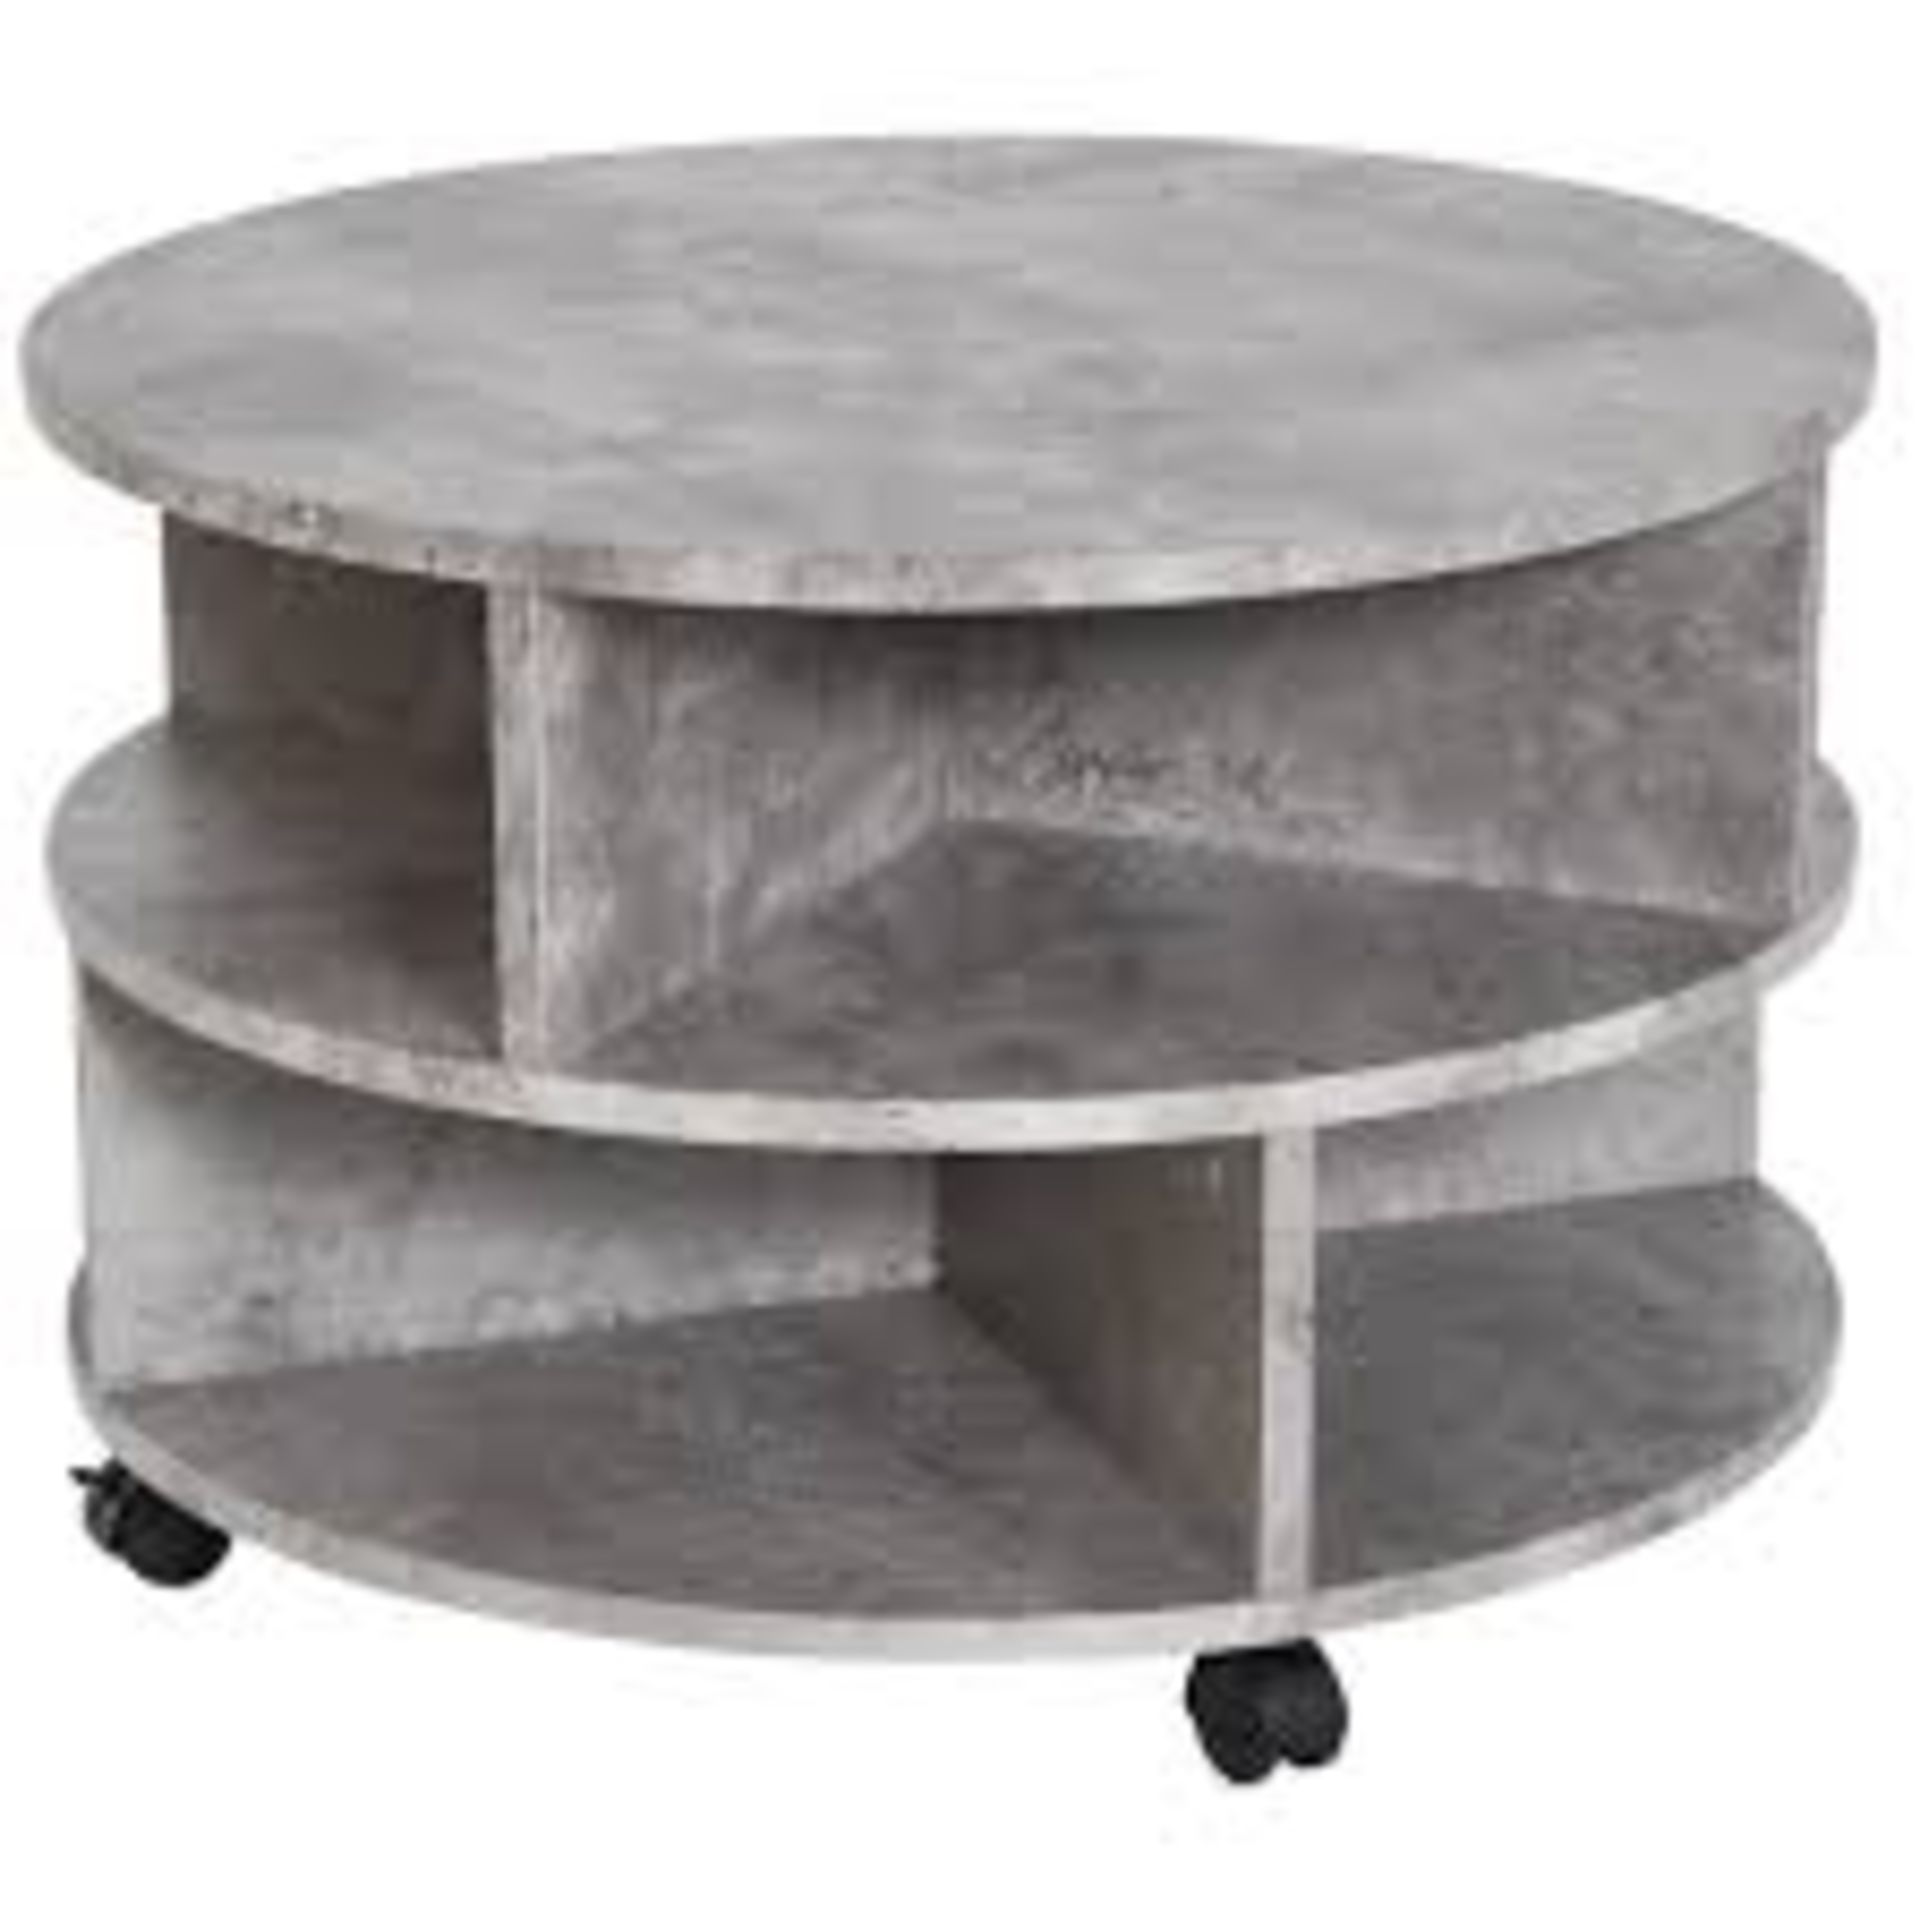 Boxed Homcon Wooden Circular Spinning Coffee Table RRP £80 (18502) Appraisals Available Upon